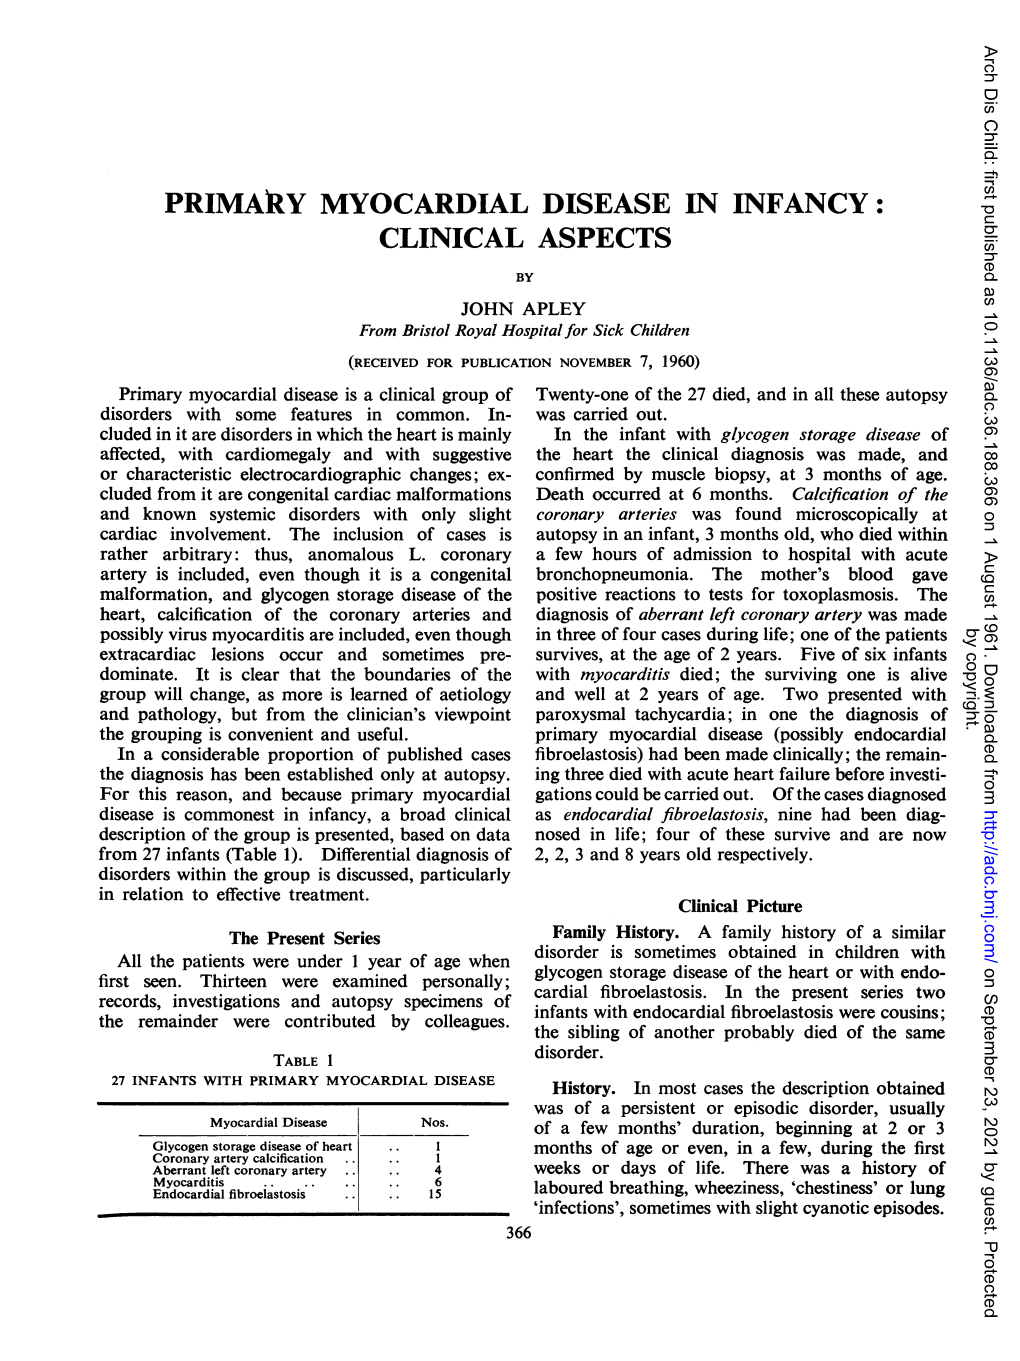 Primaky MYOCARDIAL DISEASE in INFANCY: CLINICAL ASPECTS